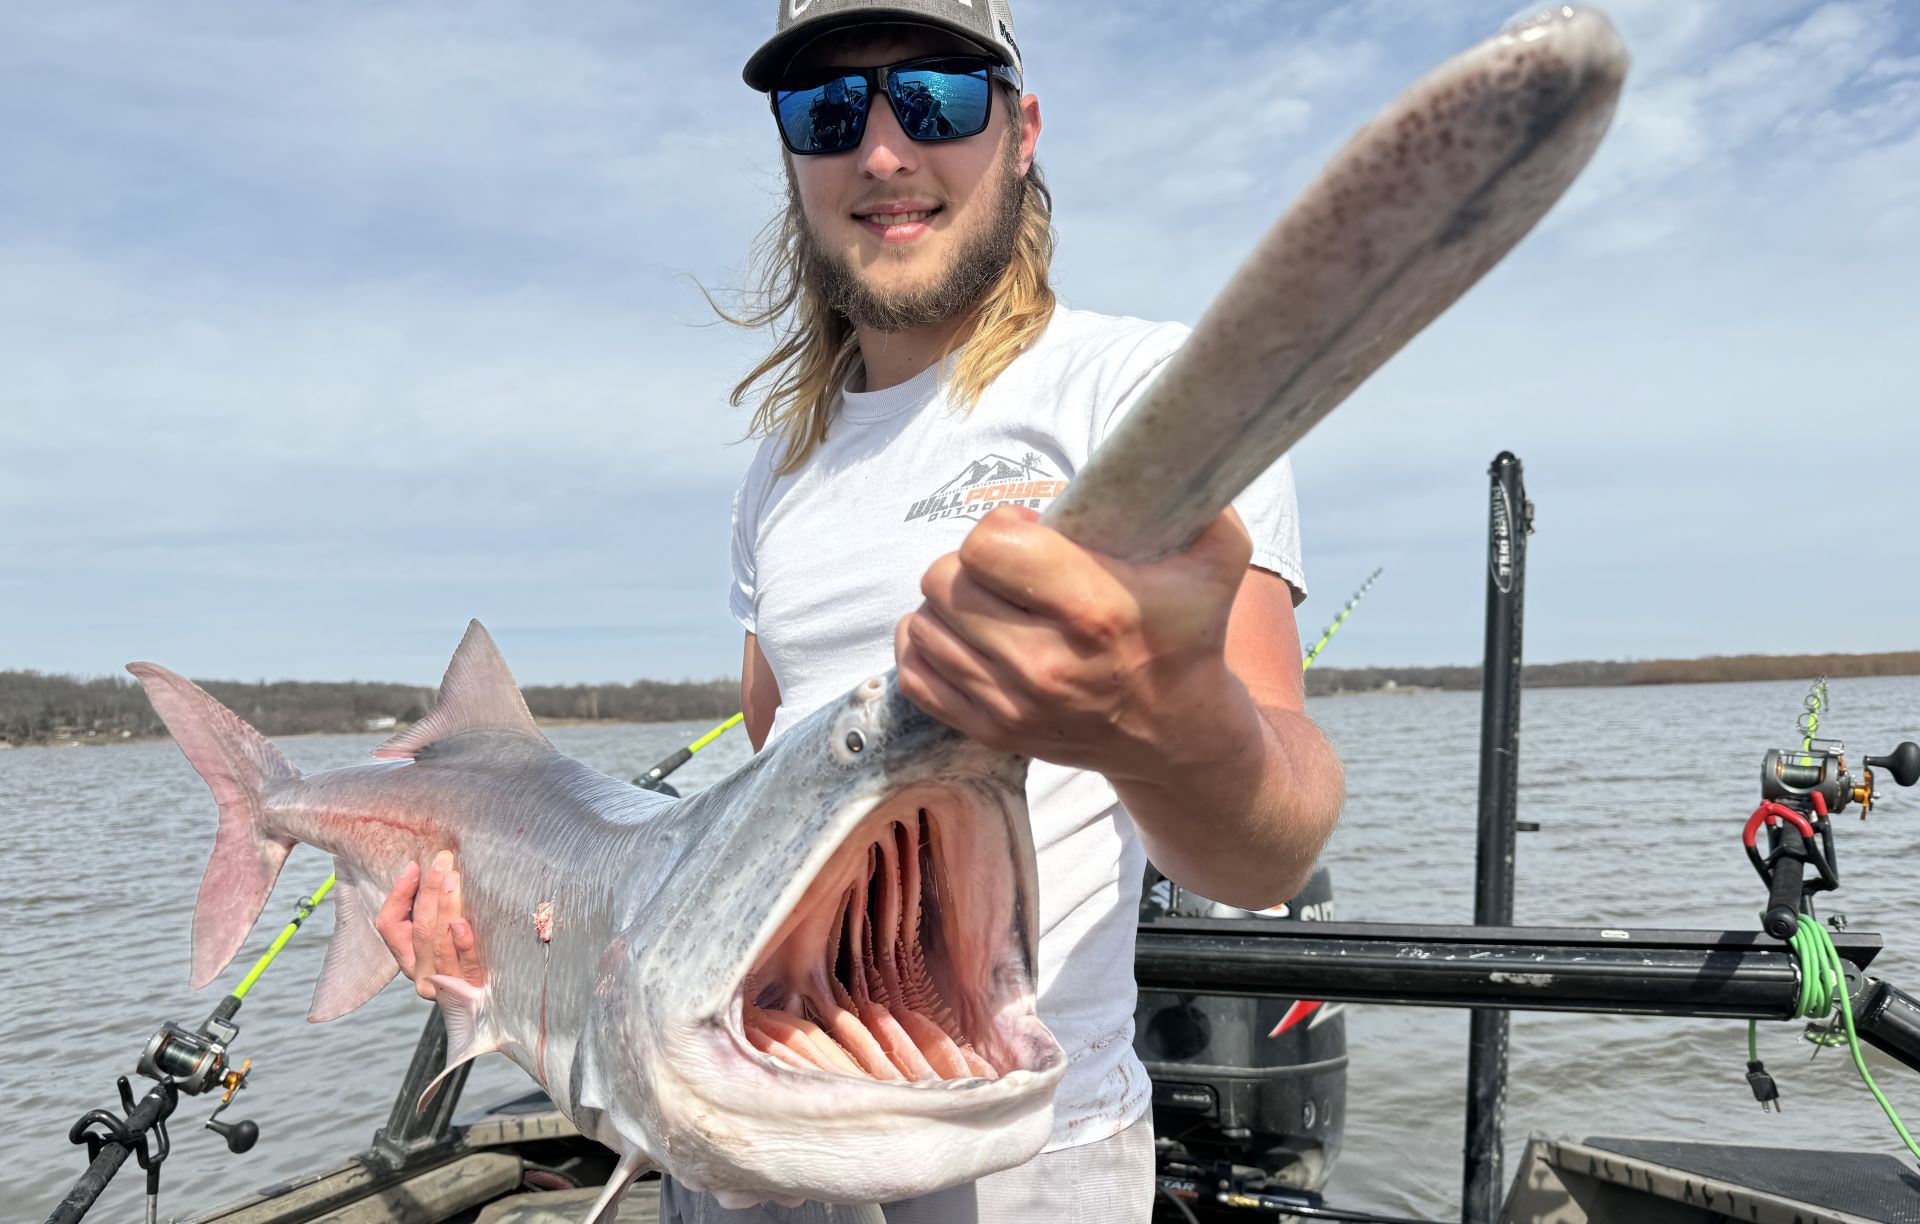 Haydn Williams, a guide on Grand Lake O' the Cherokees, displays the carrier of spring fever – a paddlefish.